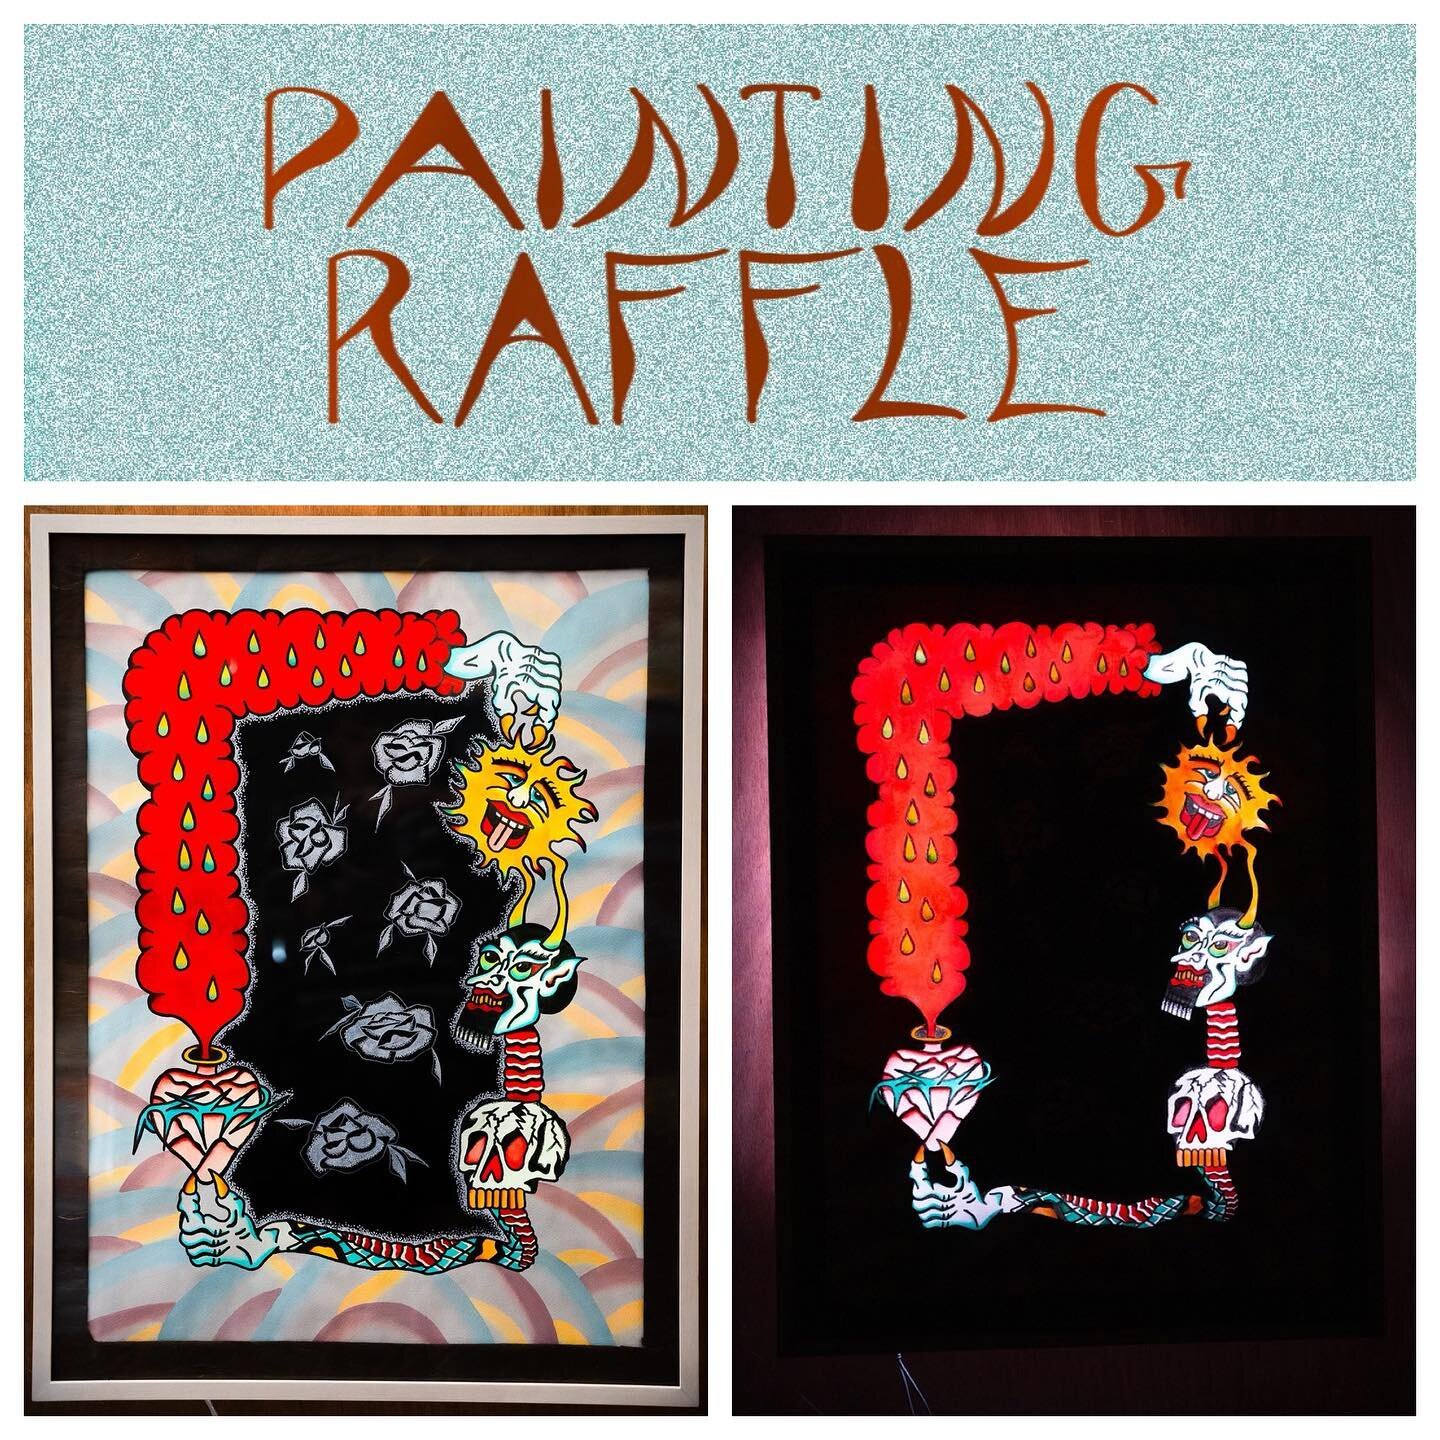 PAINTING RAFFLE !!! Swipe for details and how to enter !
&bull;
Hey everyone ! I&rsquo;m raffling off this light-up painting. It was really fun to make. Here are the details of the painting (frame/lights/remote is all included)
&bull; 32&rdquo;x23&rd